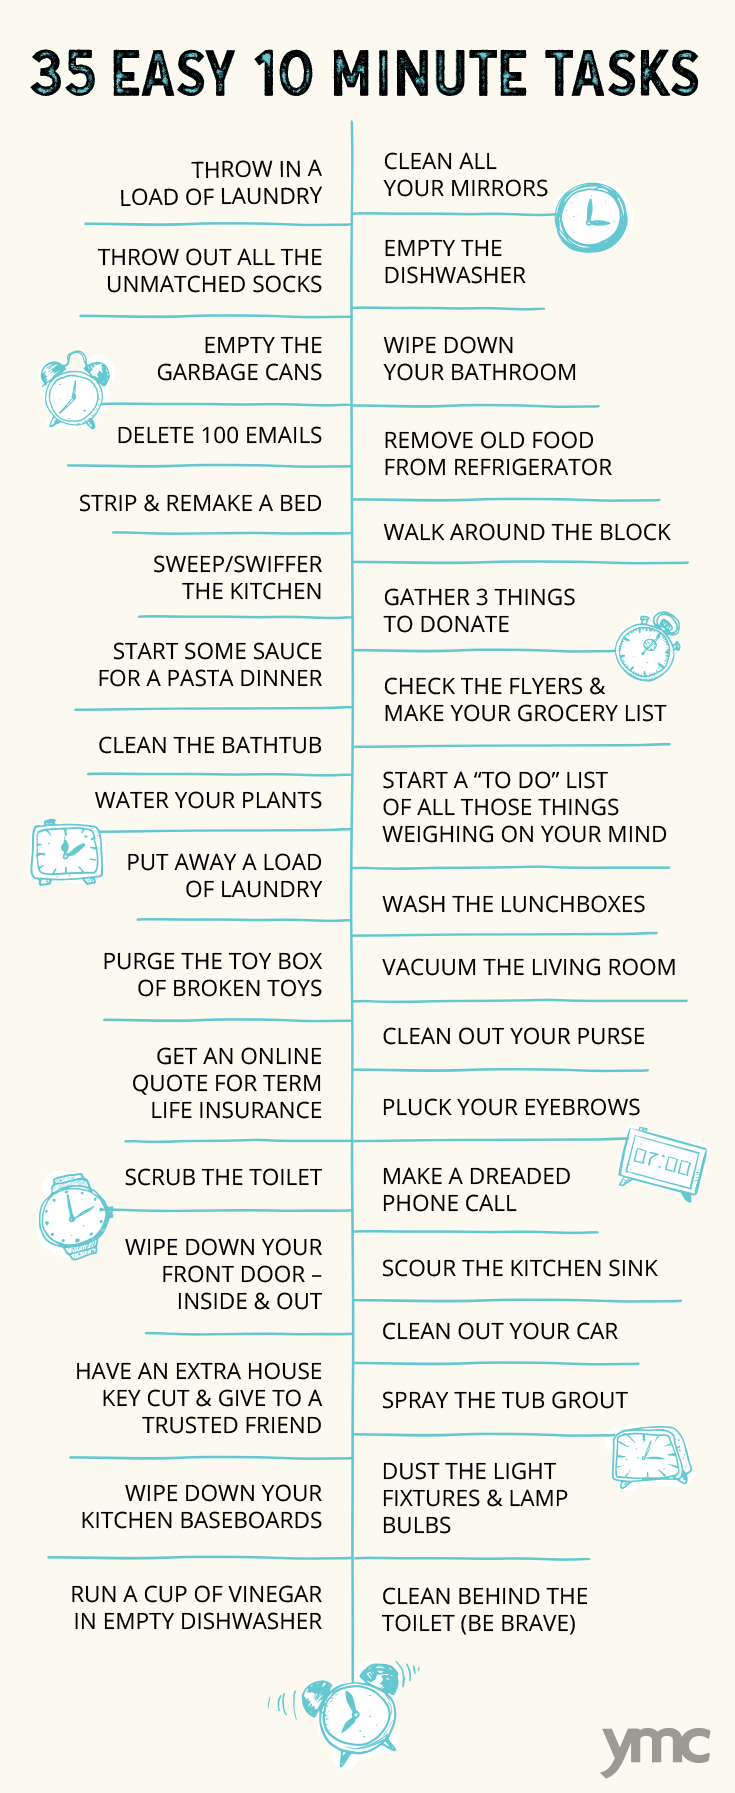 Set a timer, because here's a list of chores you can do in 10-12 minutes: